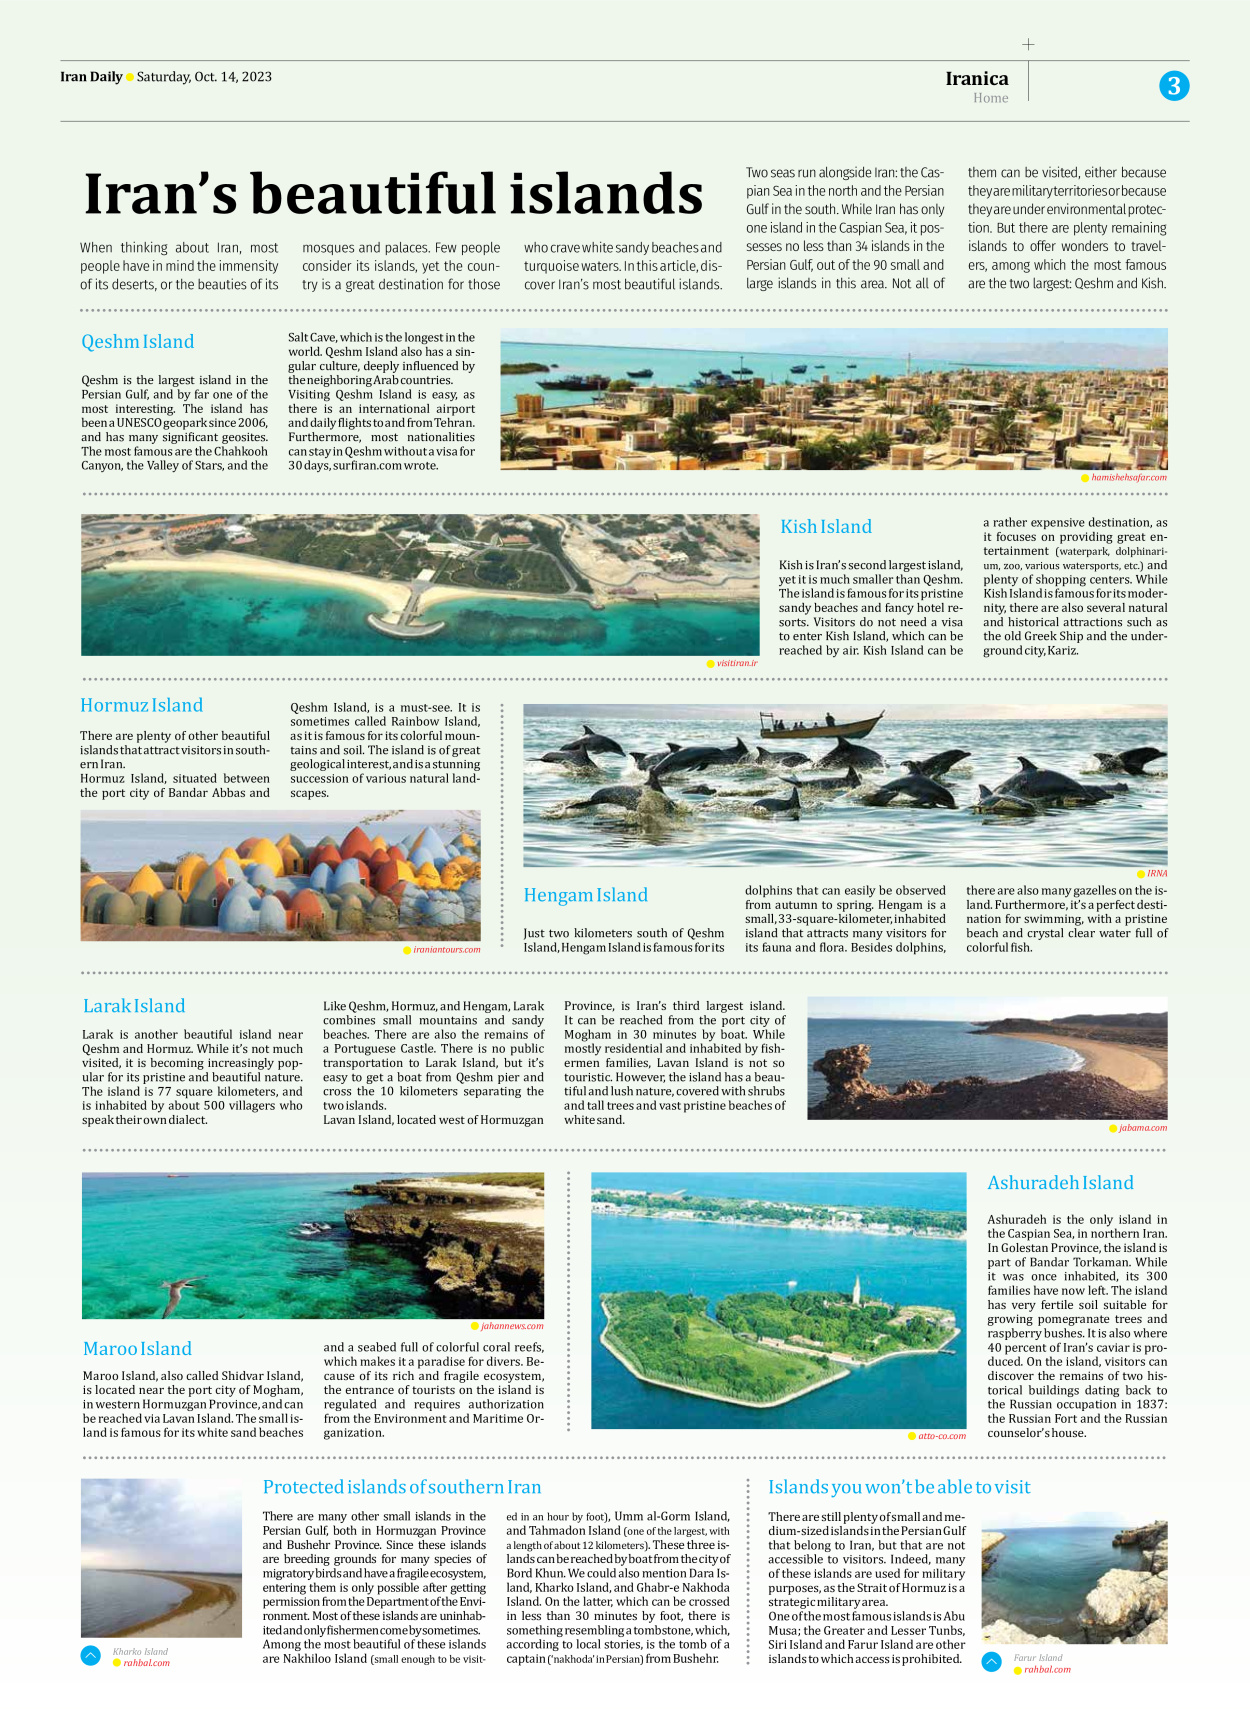 Iran Daily - Number Seven Thousand Four Hundred and Seven - 14 October 2023 - Page 3